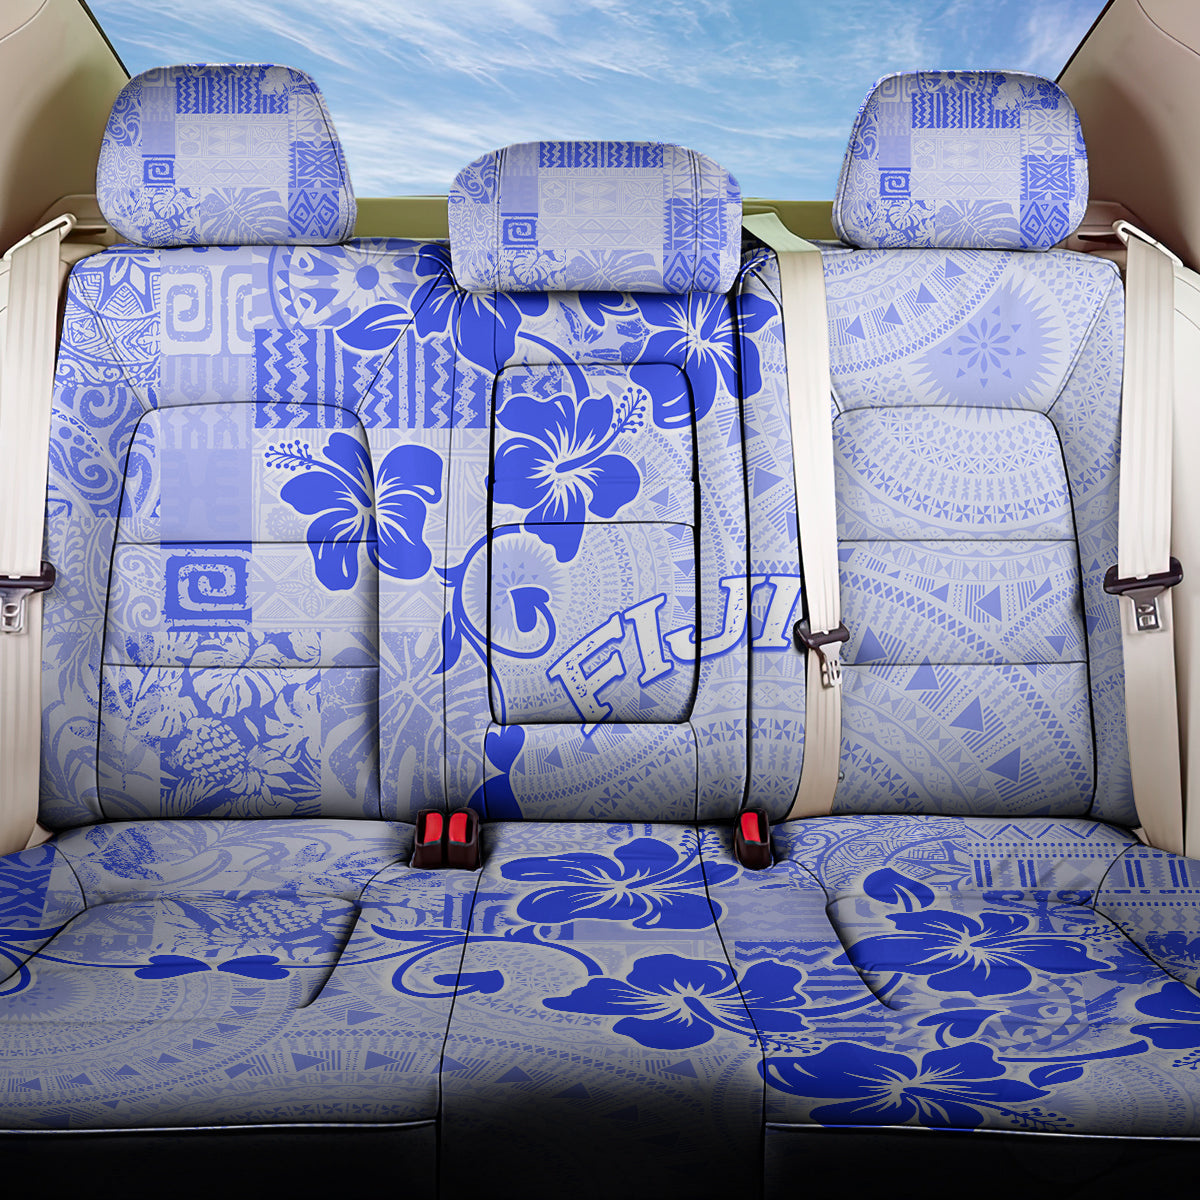 Fiji Masi With Hibiscus Tapa Tribal Back Car Seat Cover Blue Pastel LT01 One Size Blue - Polynesian Pride